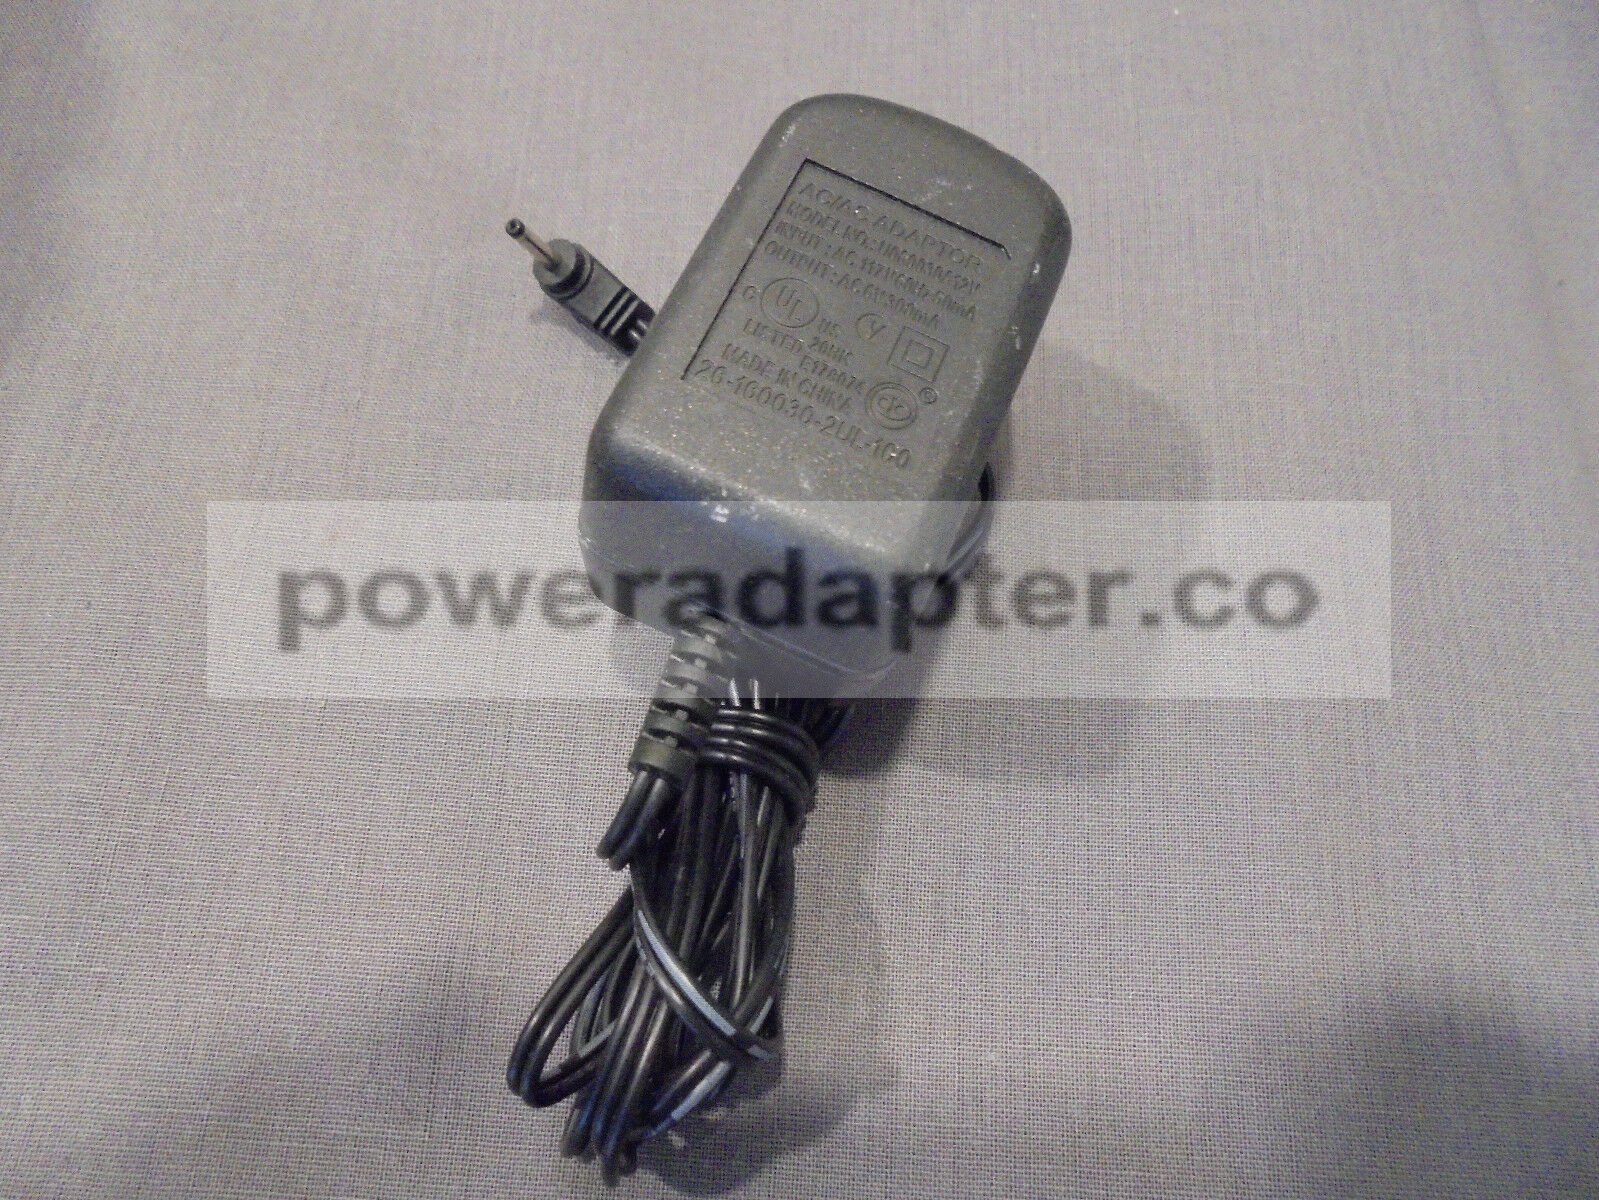 AT&T VTECH U060030A12V (Thin plug) Cordless Phone 6 VAC 300MA AC ADAPTER Condition: Used: An item that has been used